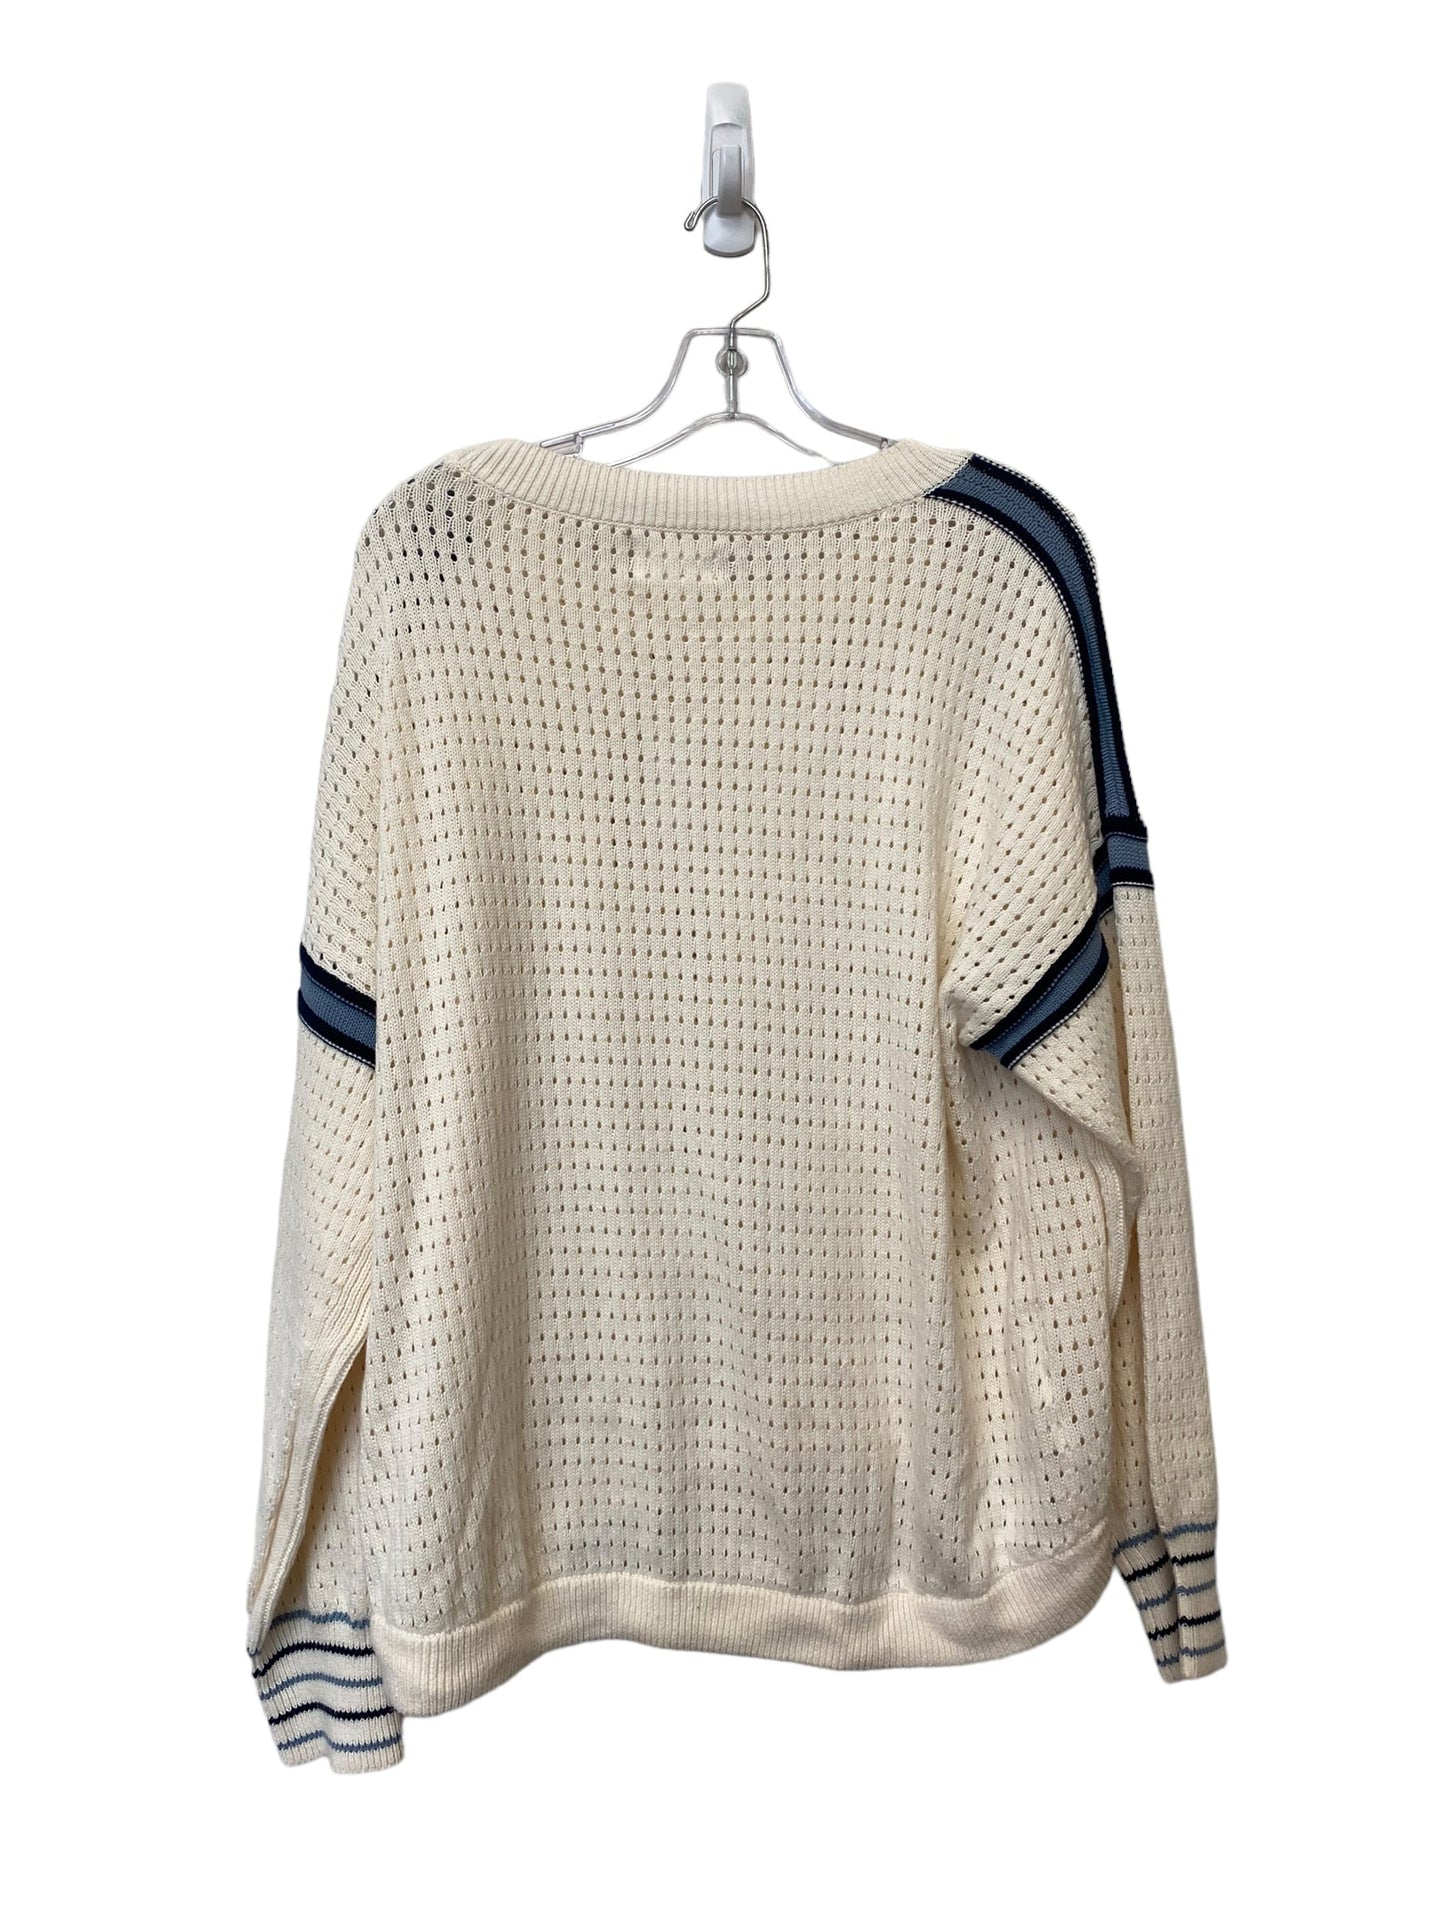 Cream Sweater Lou And Grey, Size Xl